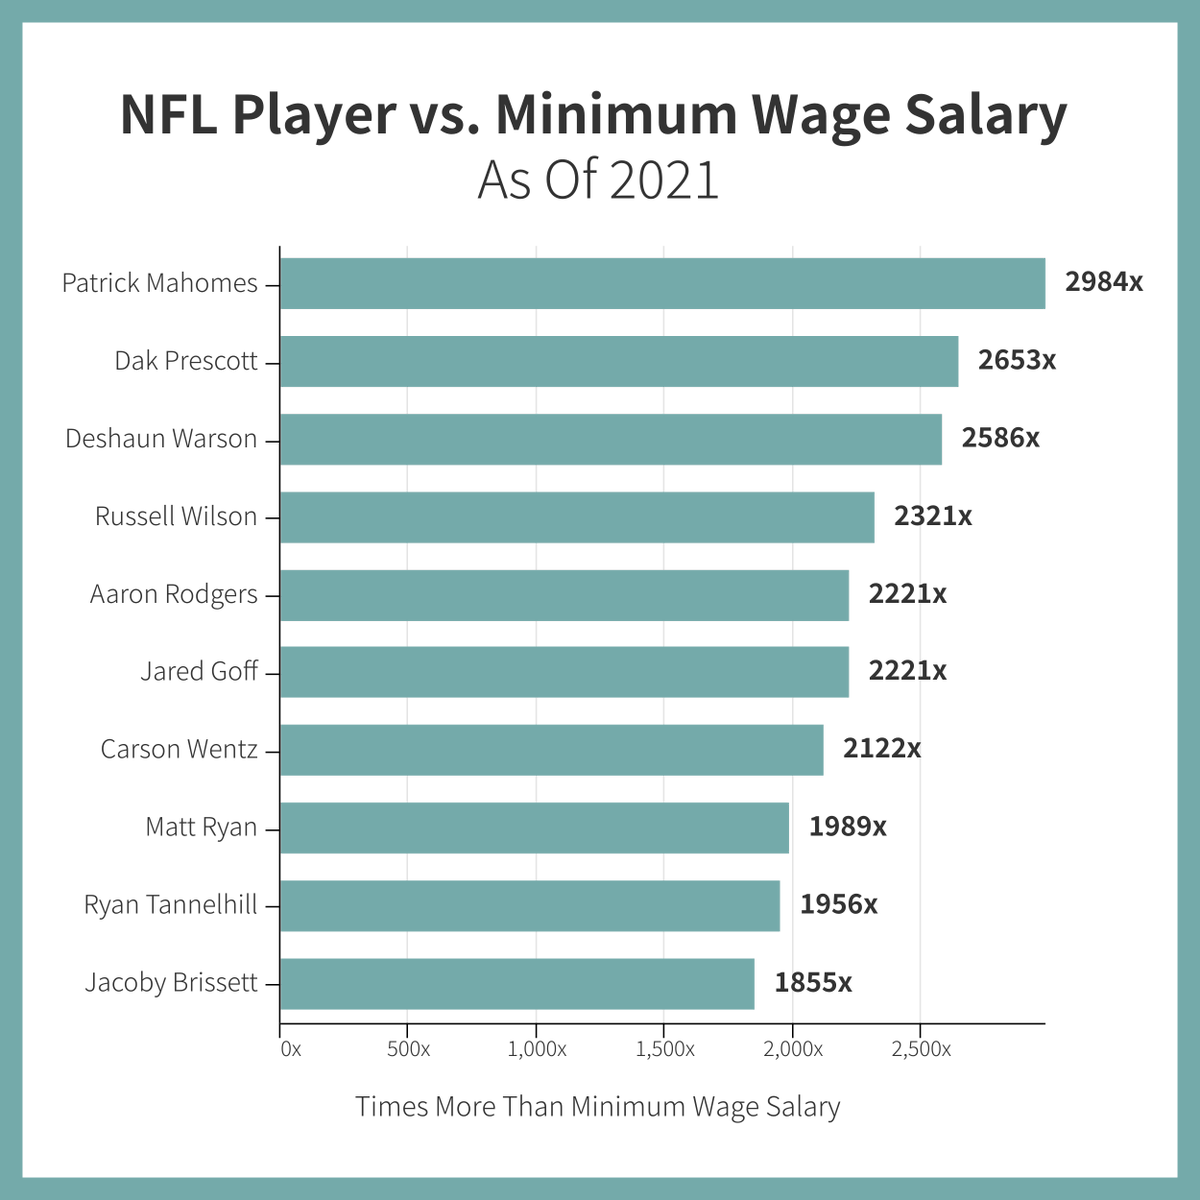 Patrick Mahomes will make 2984x MORE than someone making a minimum wage of about $15,000 per year.Someone working minimum wage would have to start working from about 1000 B.C. to make as much as he does in one year. Then would have to work until 5000 A.D to make it again.